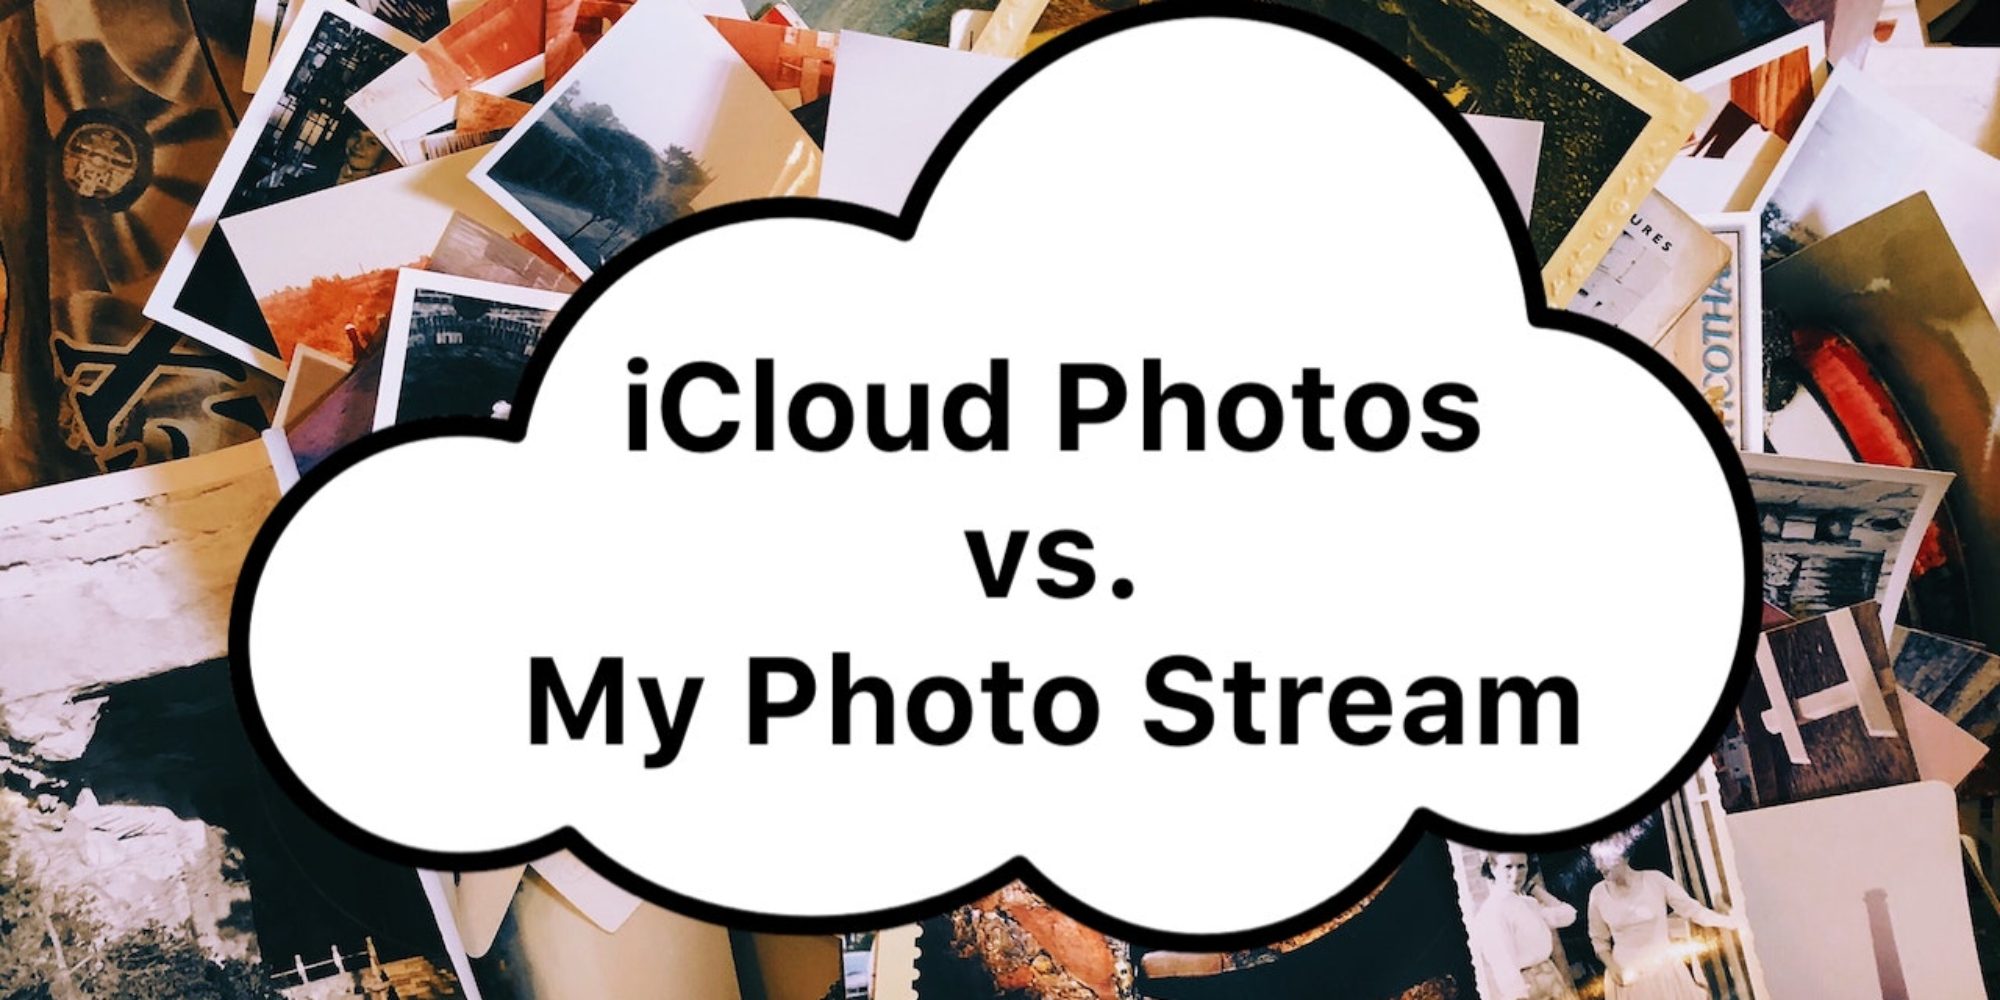 How to Choose Between iCloud Photos and My Photo Stream